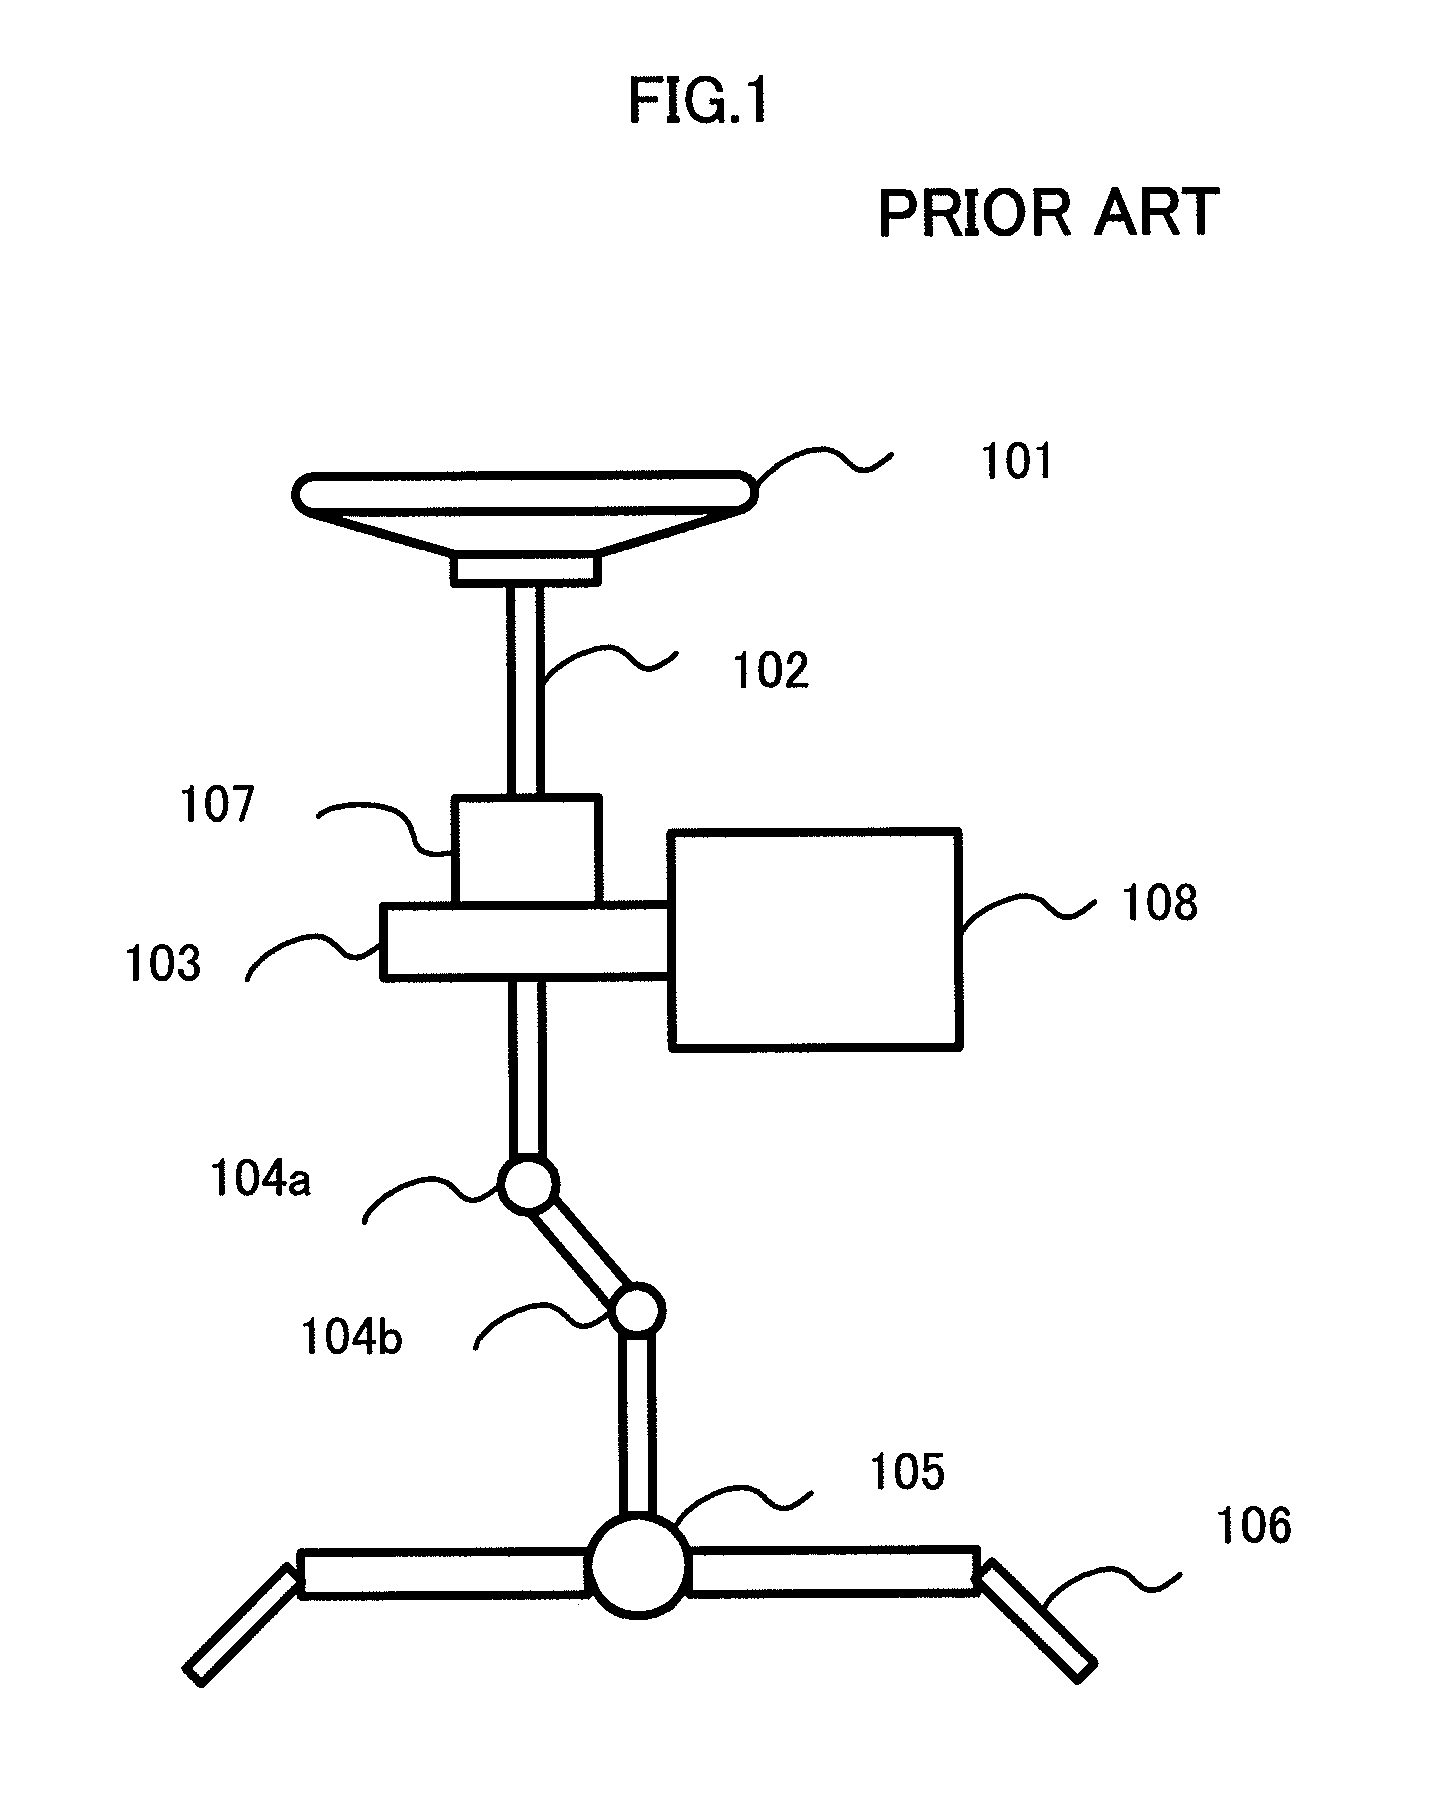 Control unit for electric power steering apparatus